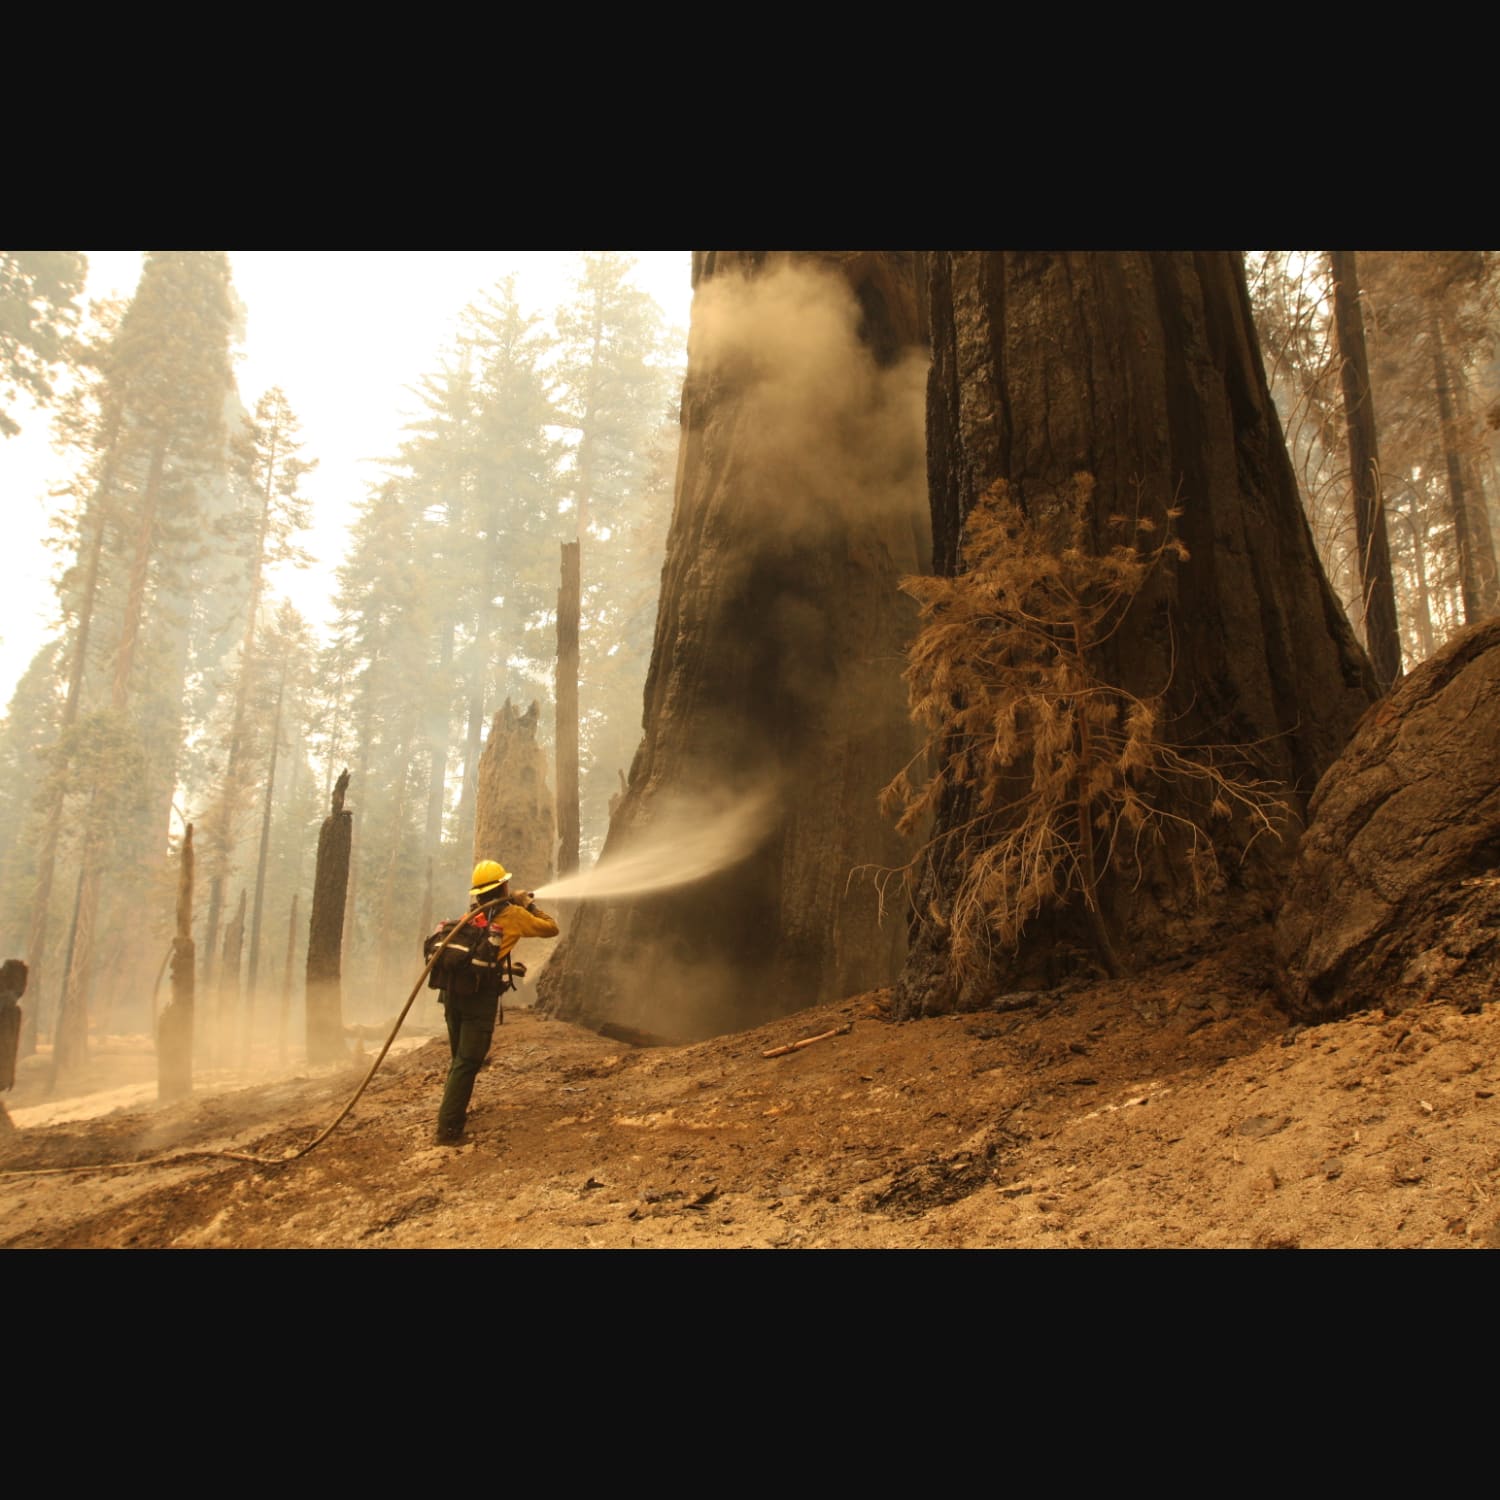 In California, United States of America, a firefighter "sprays down a giant sequoia along the Trail of 100 Giants to extinguish heat." Photo credit: Garrett Dickman / National Park Service